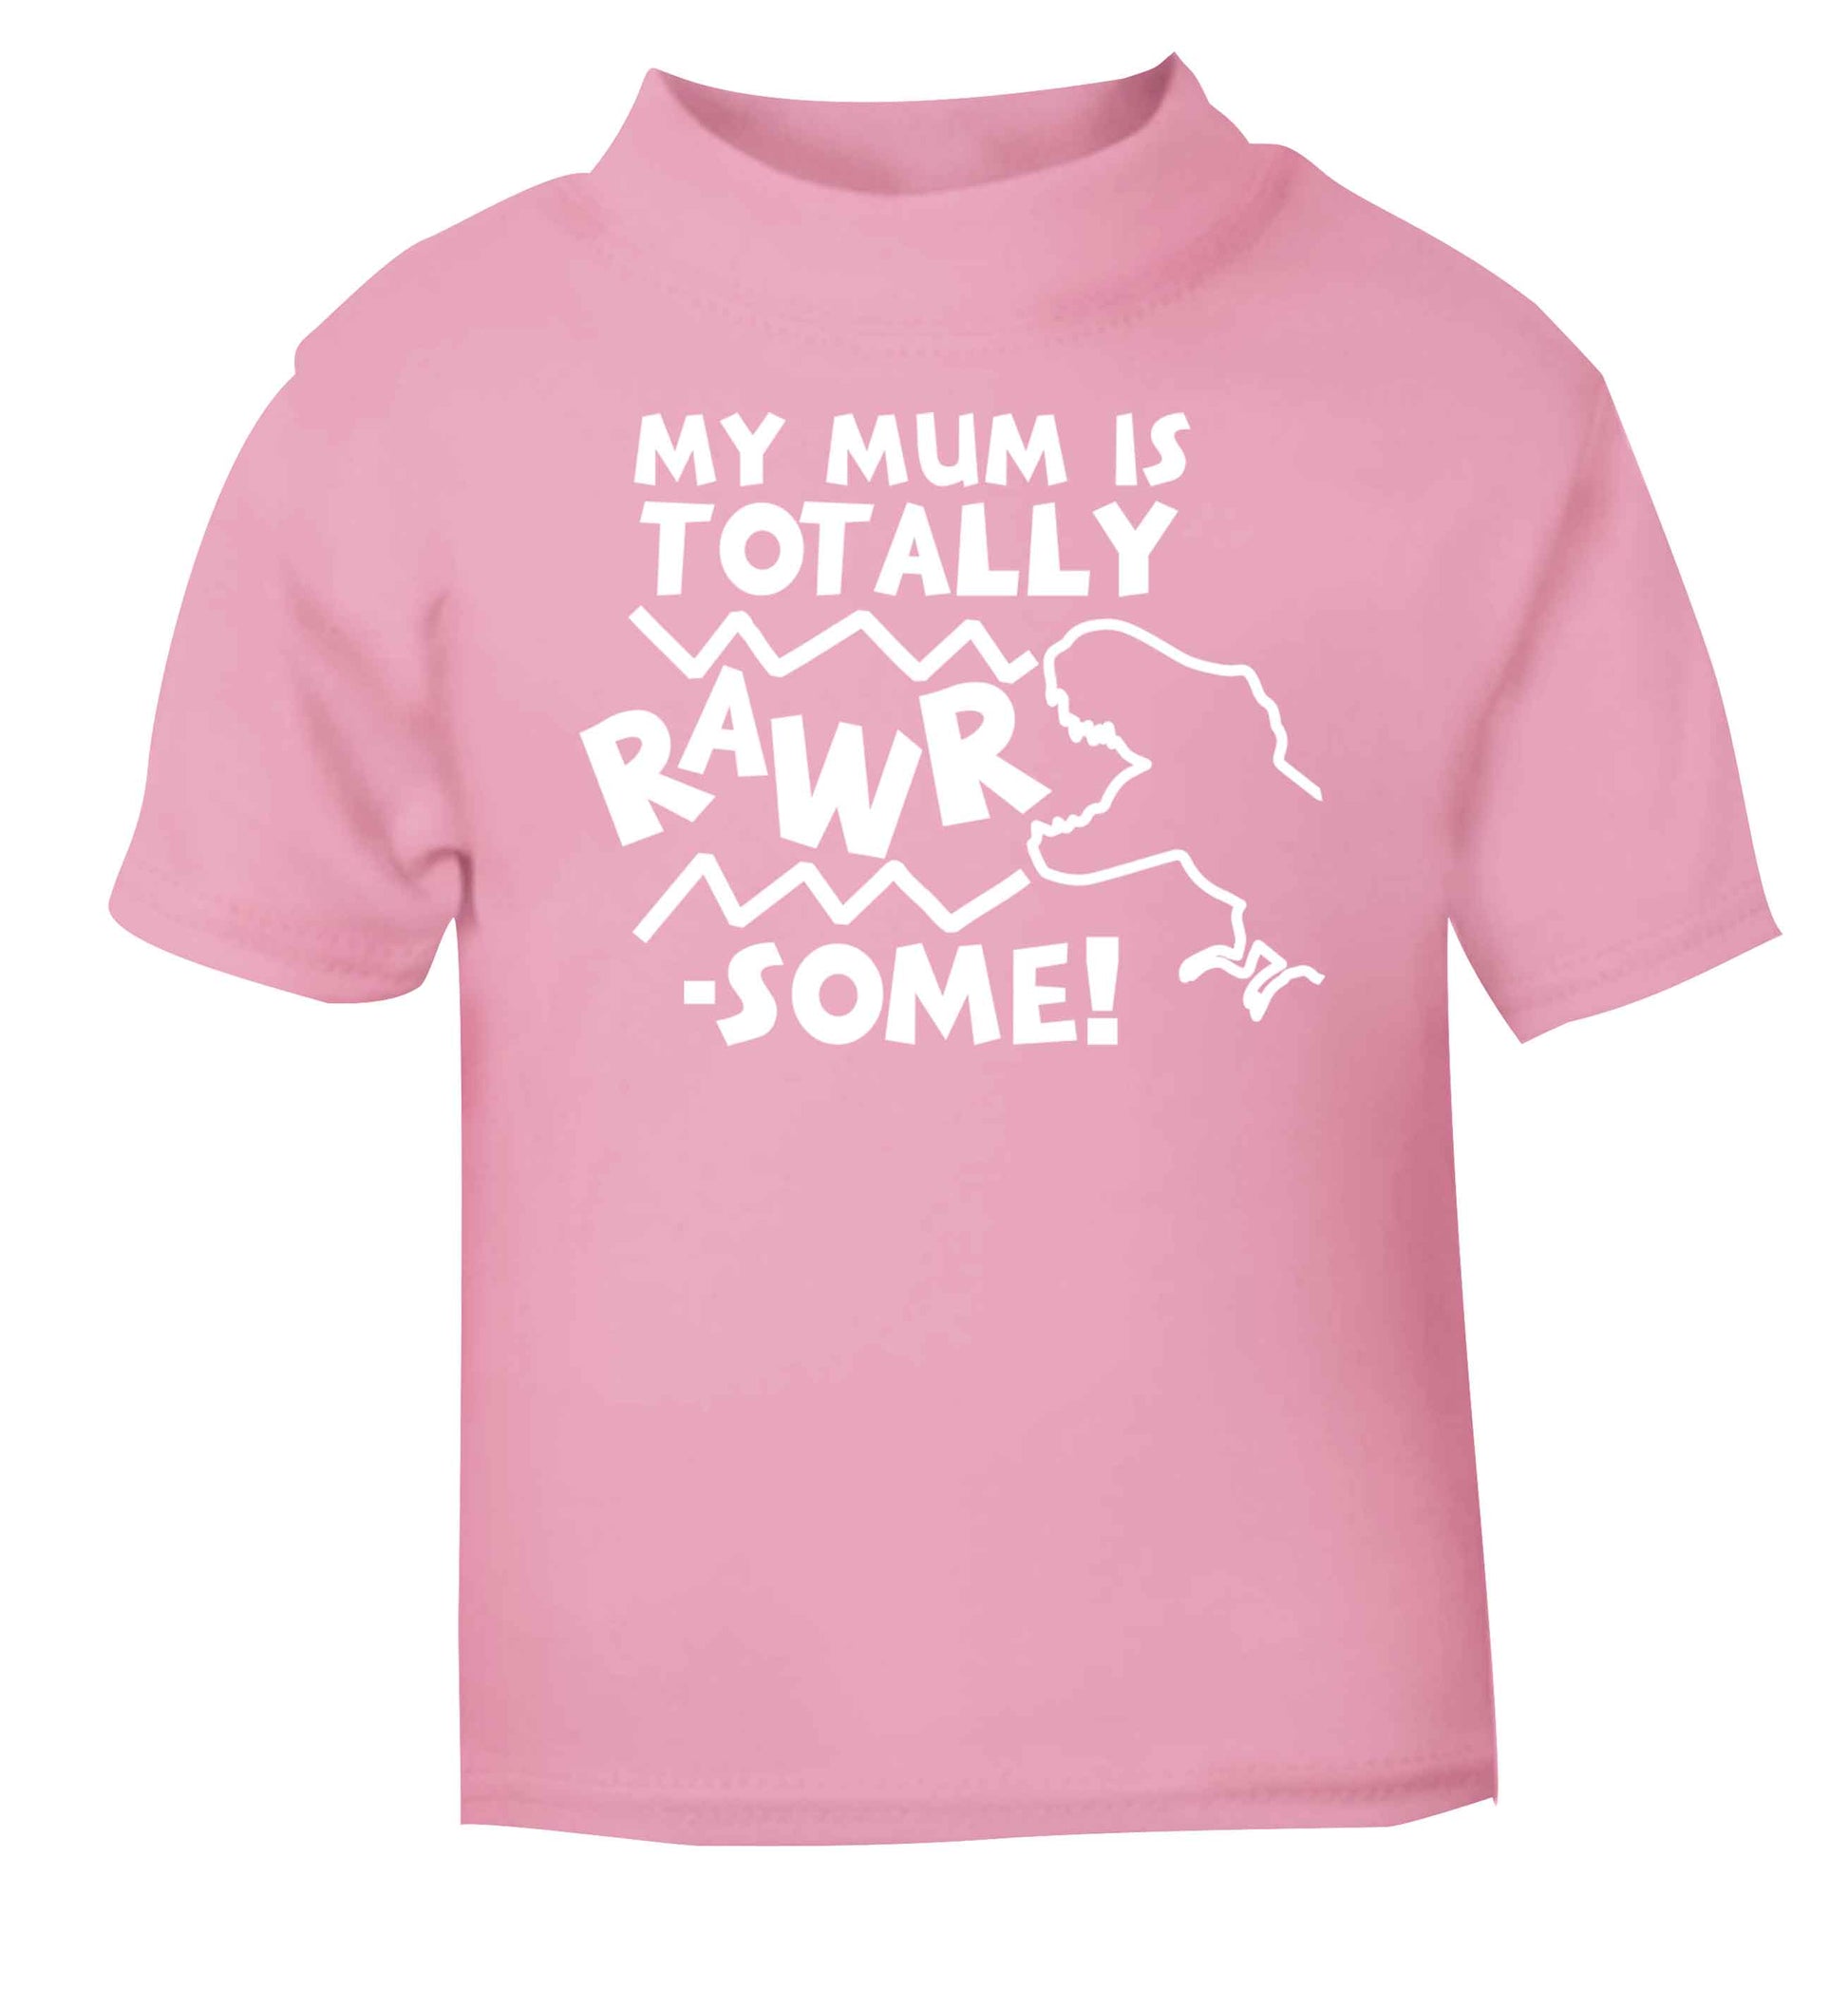 My mum is totally rawrsome light pink baby toddler Tshirt 2 Years